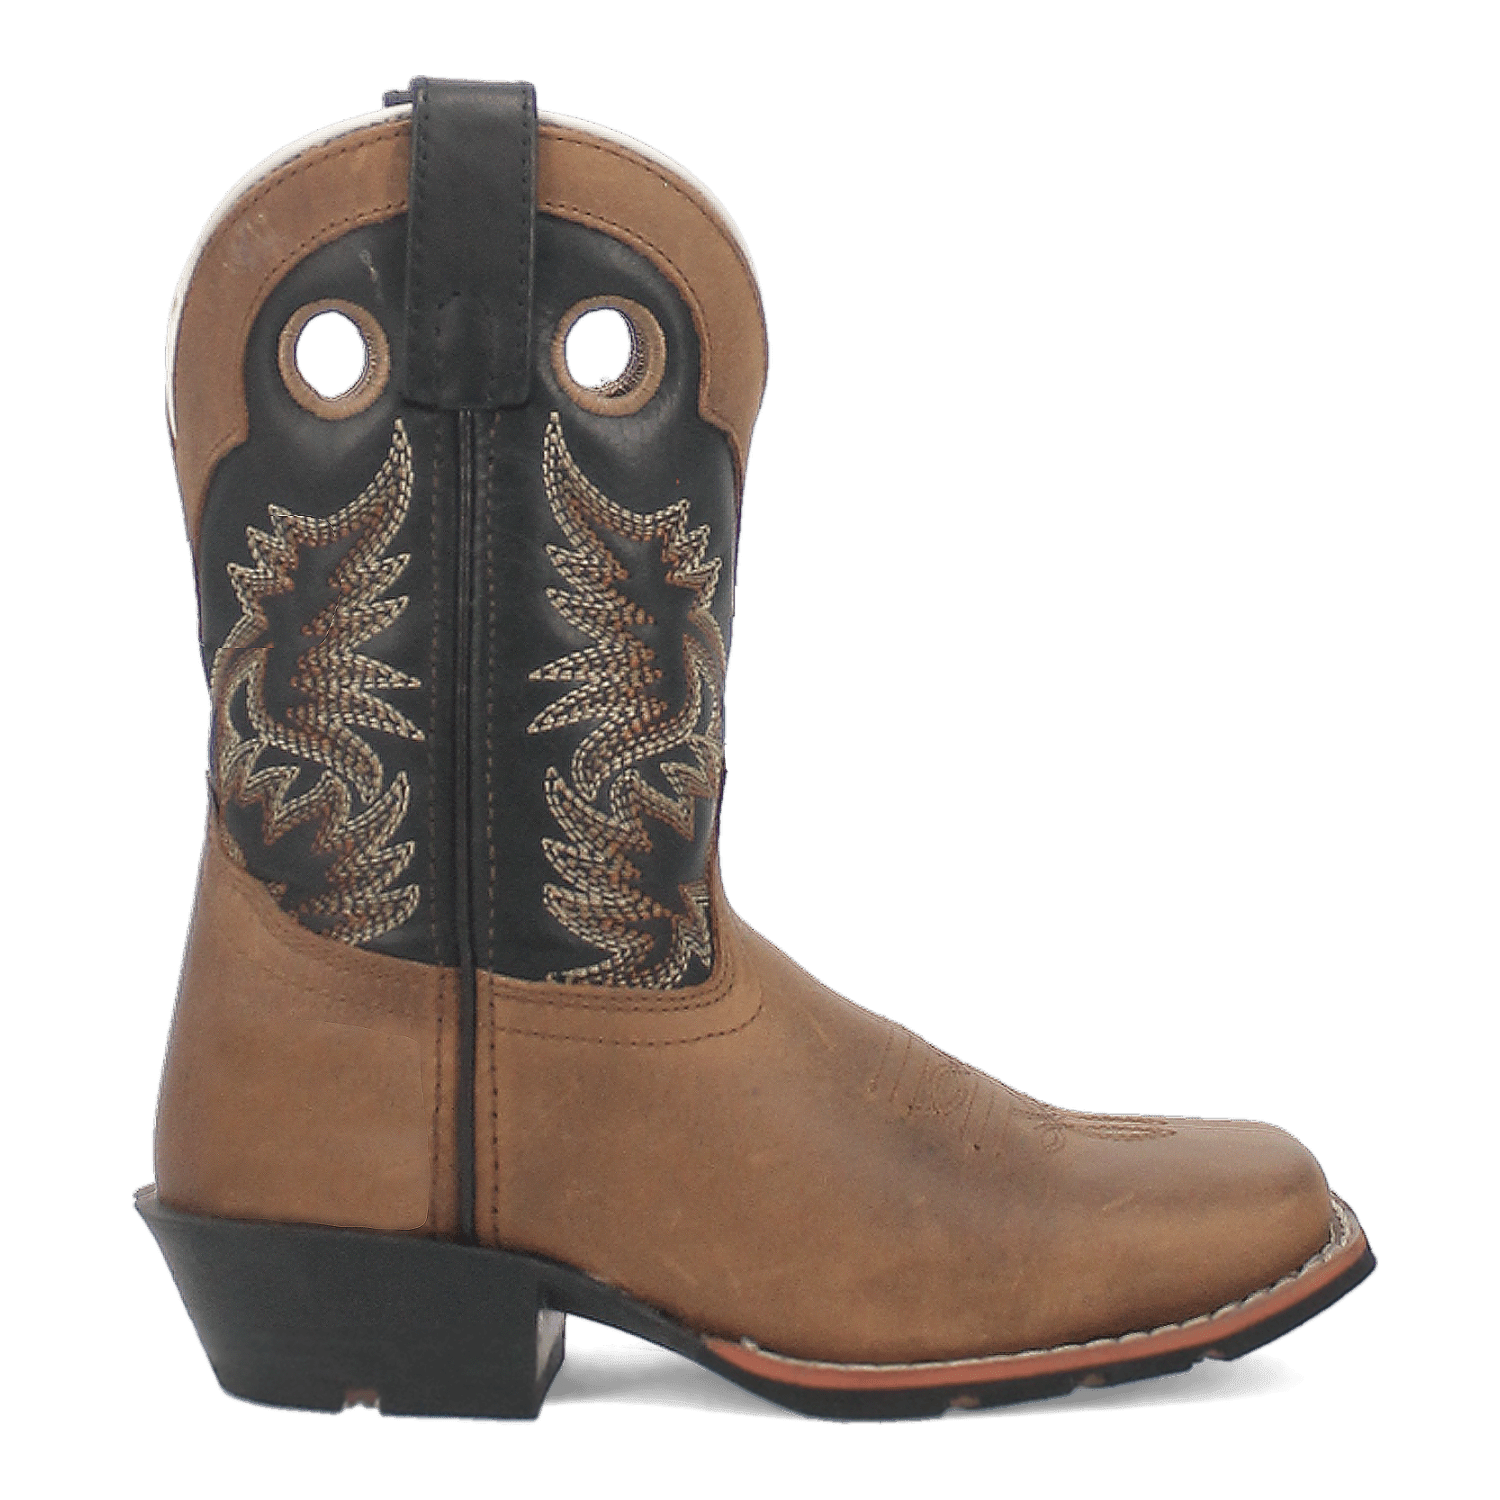 RASCAL LEATHER YOUTH BOOT Image